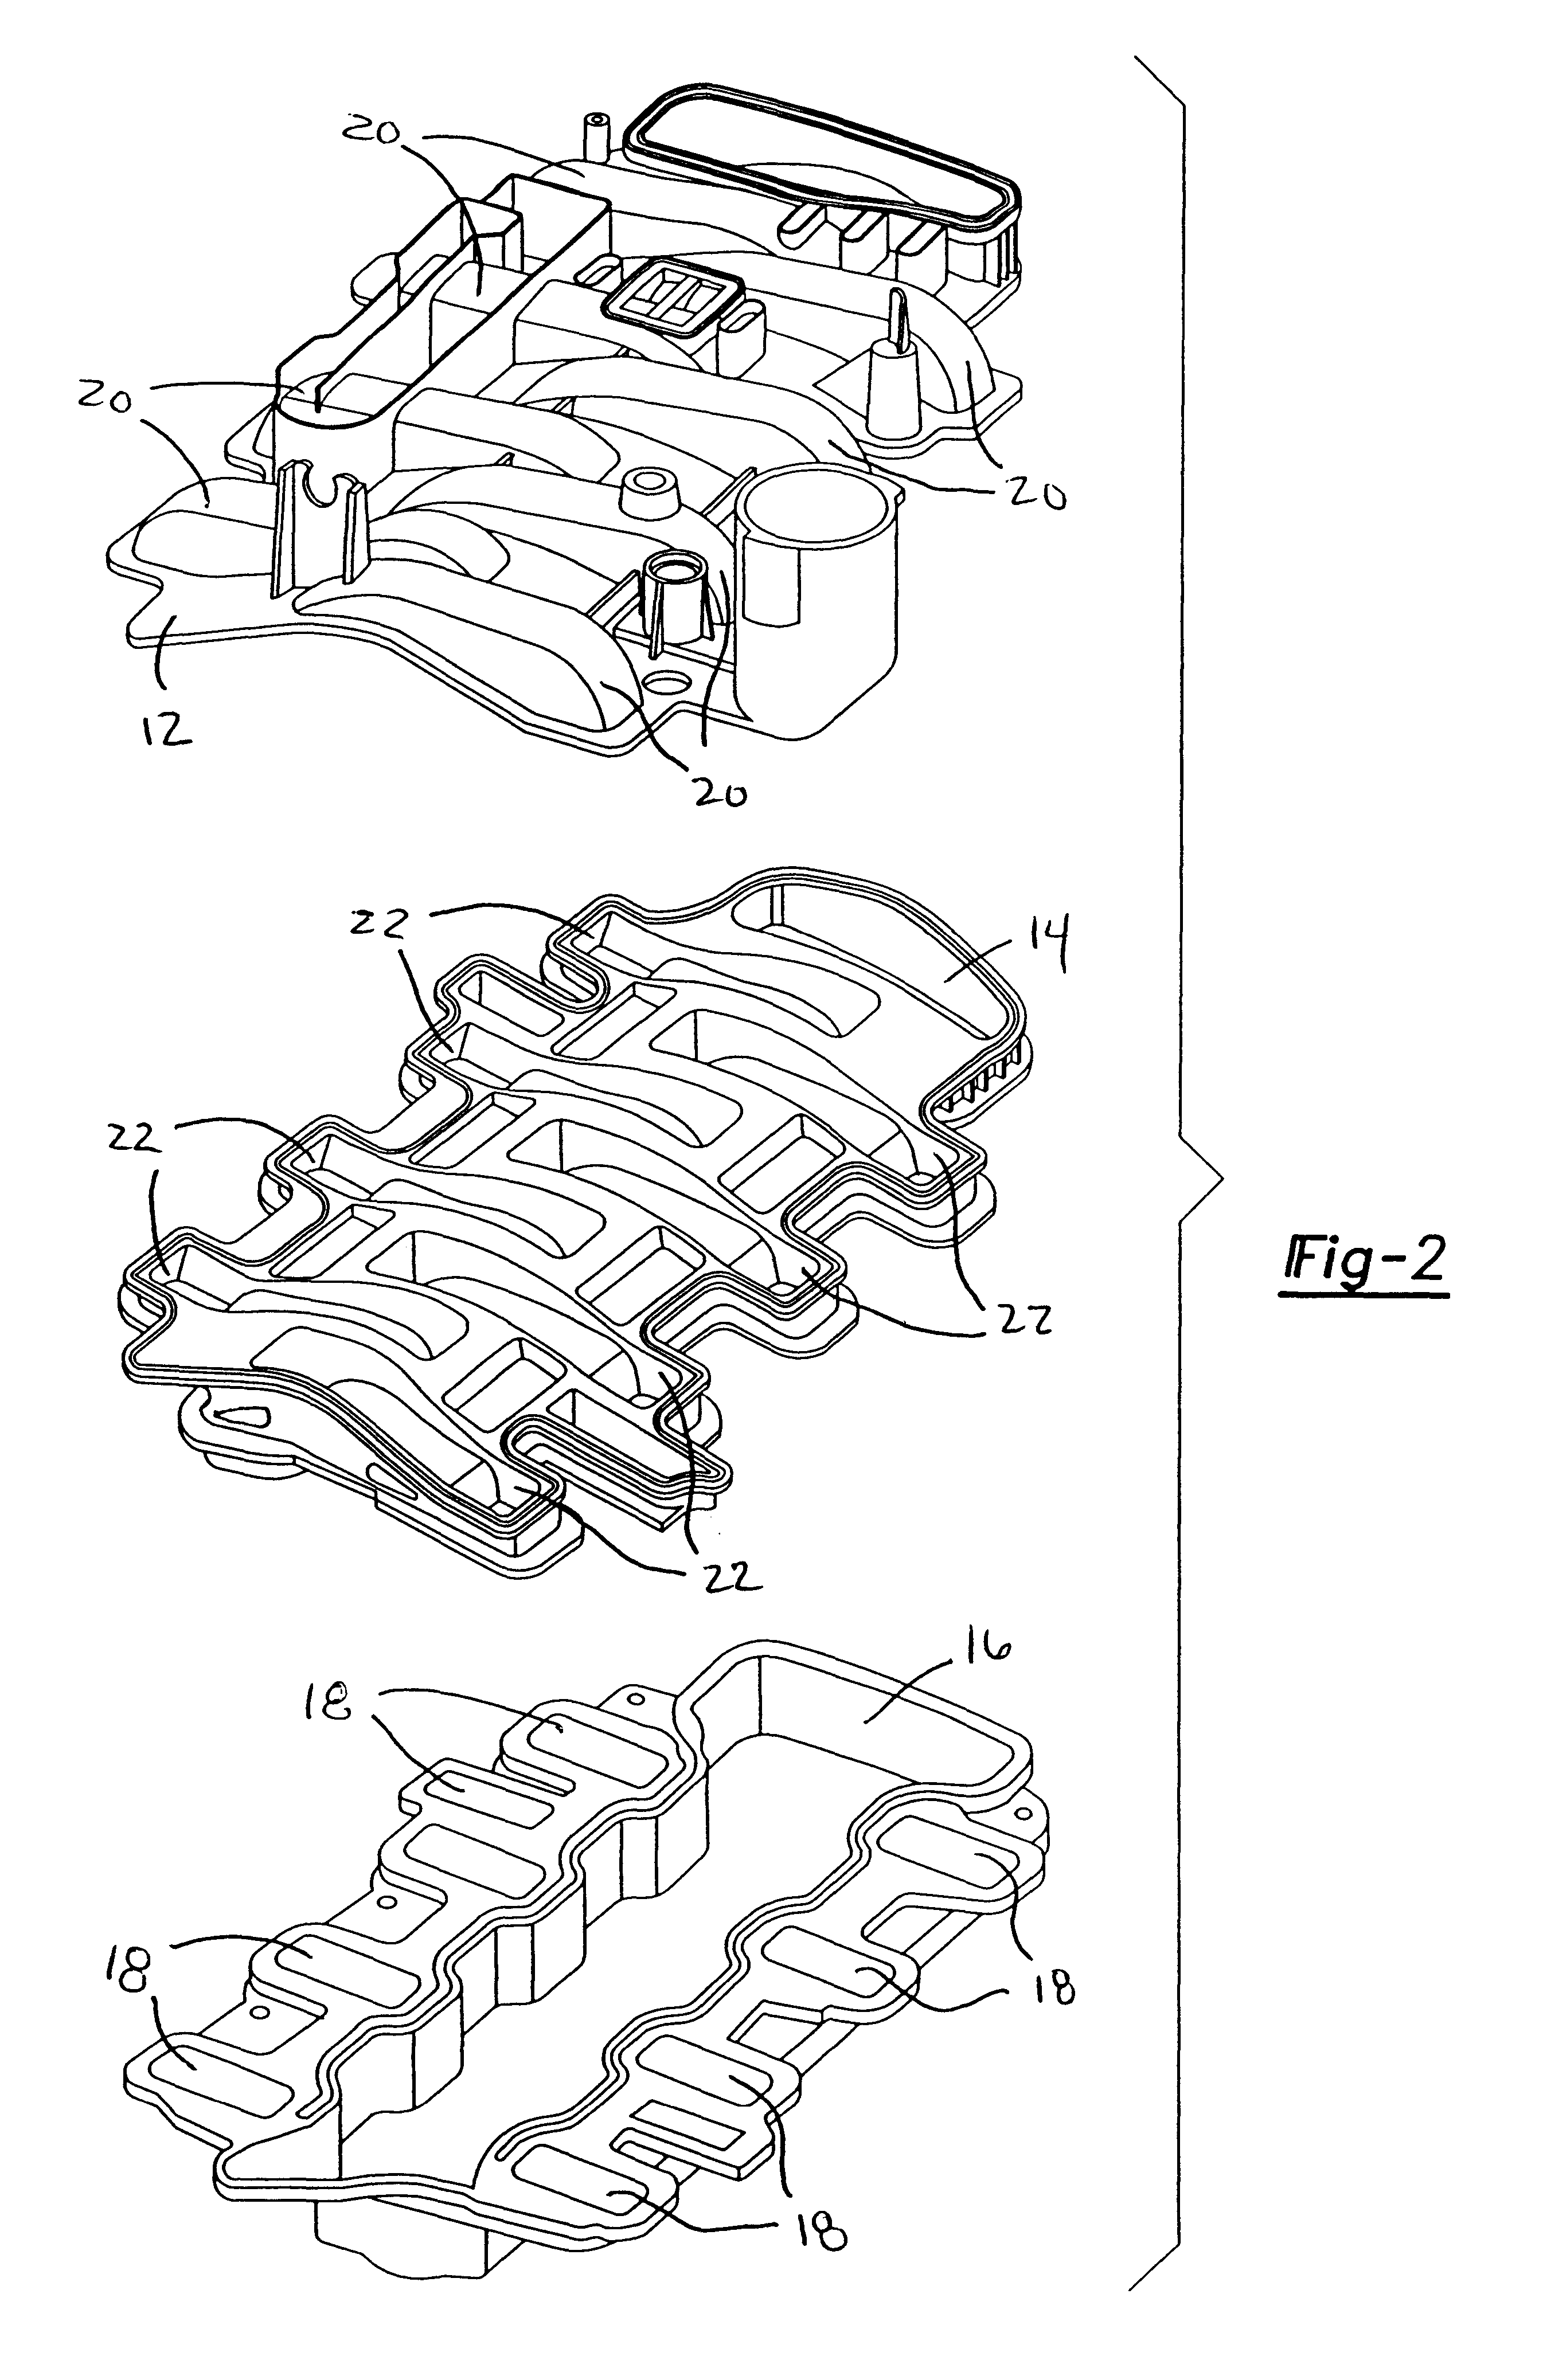 Intake manifold with internal fuel rail and injectors